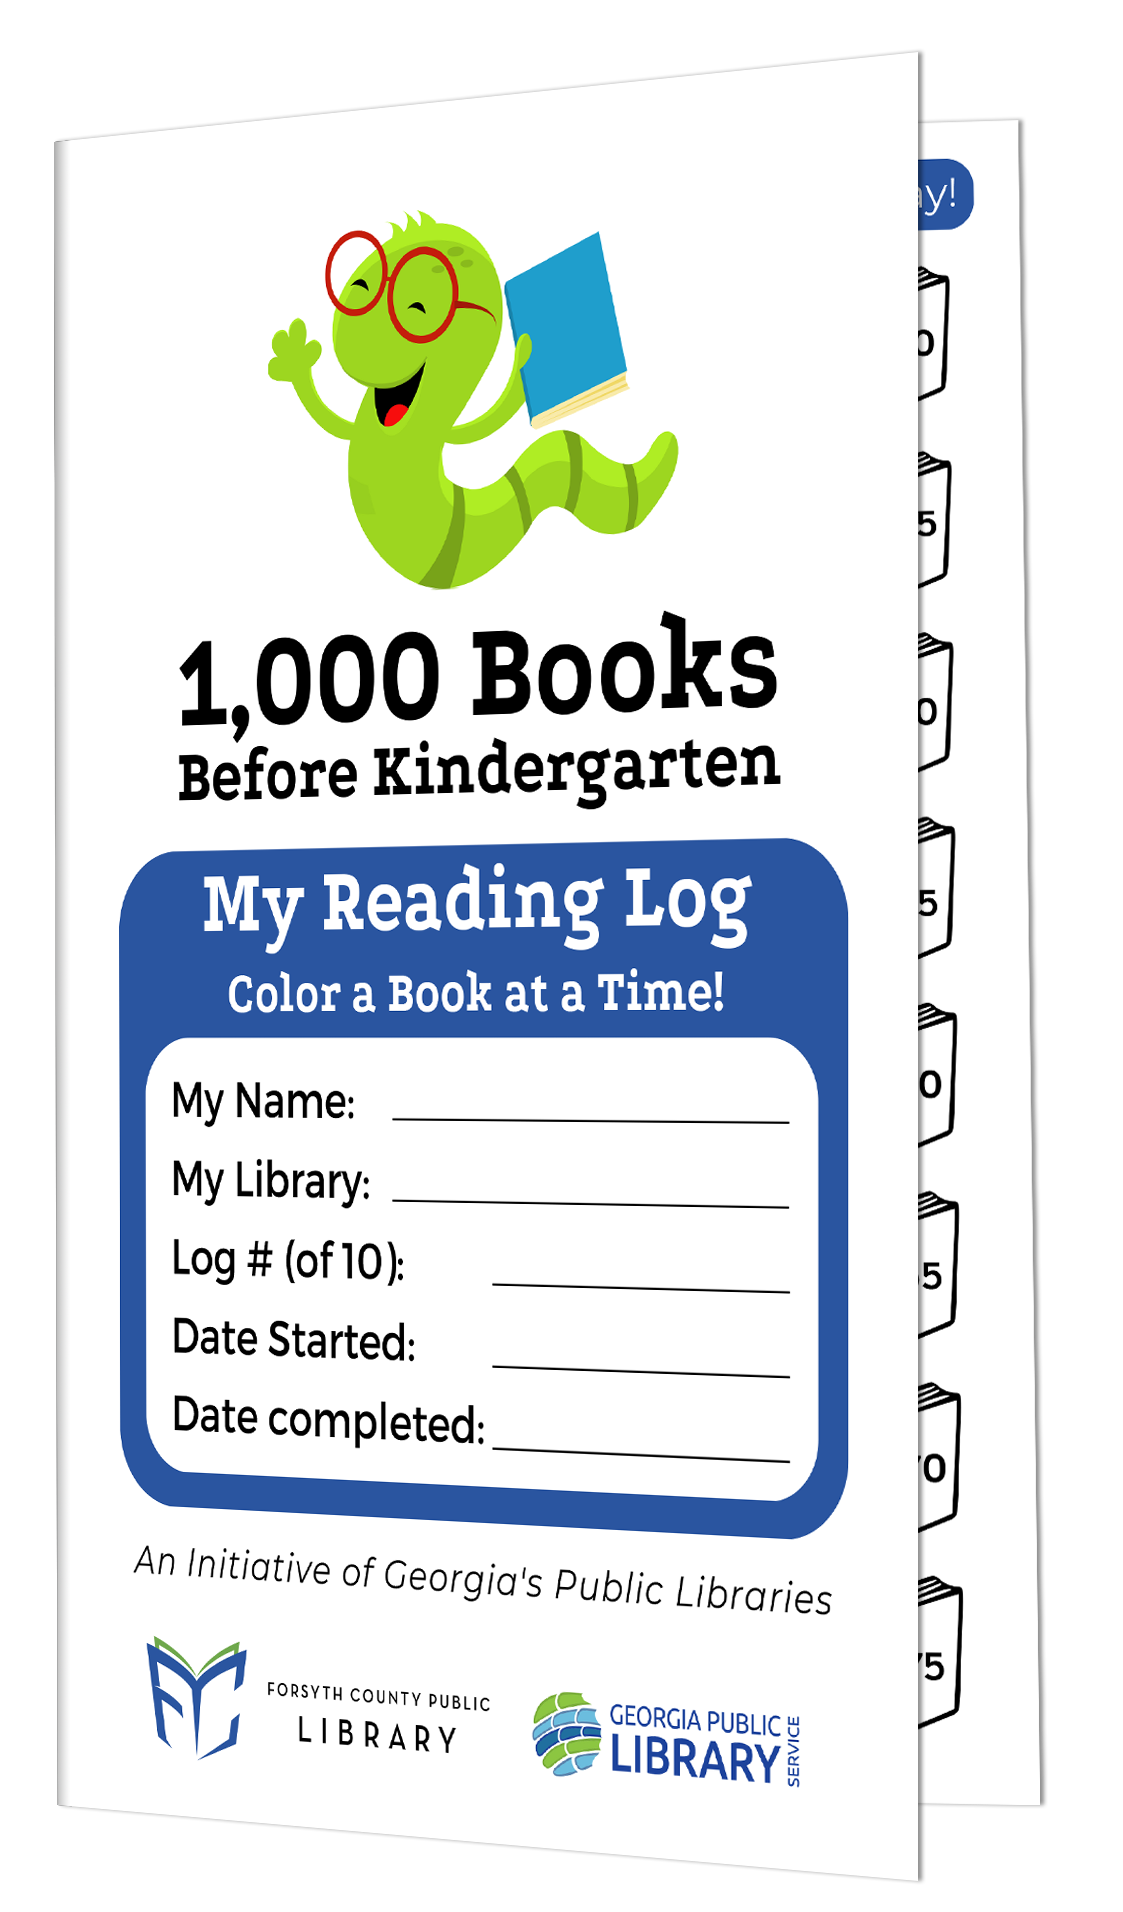 Reading Log Booklet to keep track of book reading